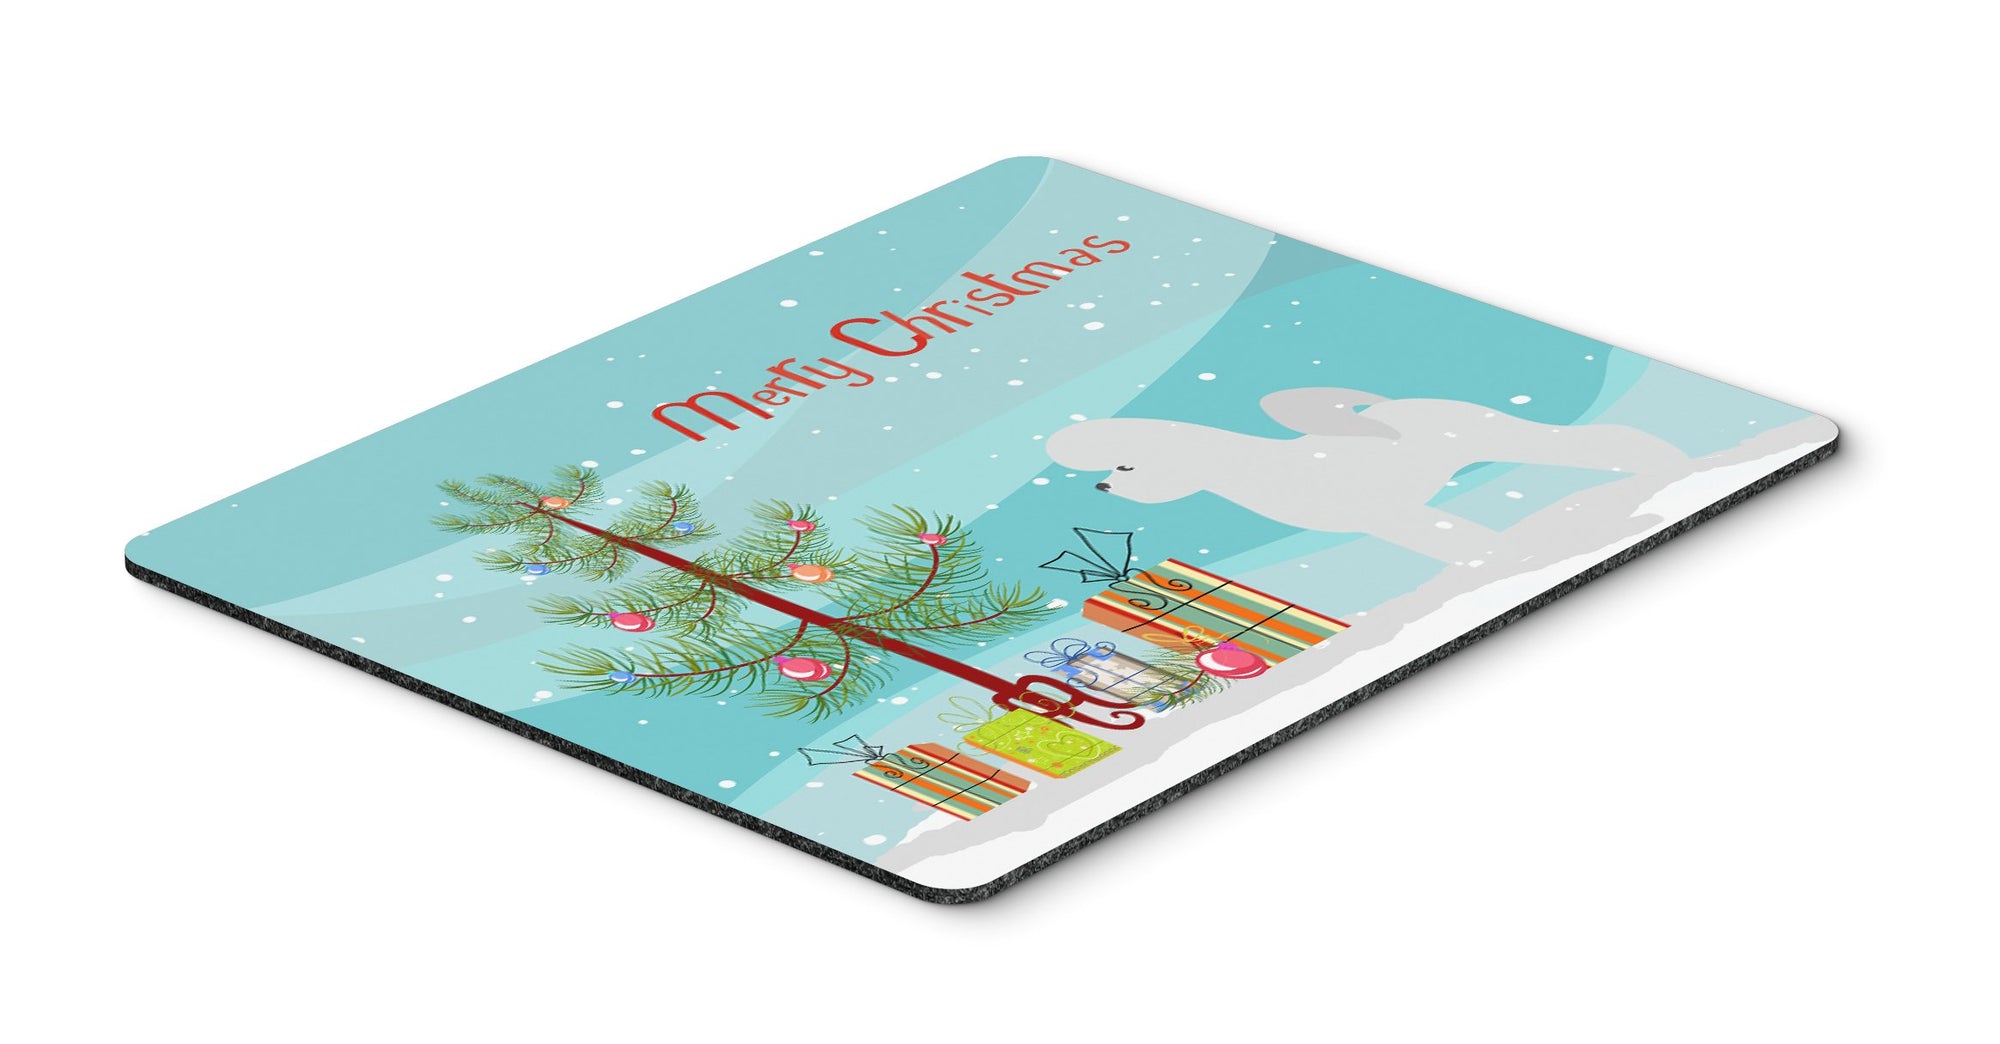 Bichon Frise Merry Christmas Tree Mouse Pad, Hot Pad or Trivet by Caroline's Treasures